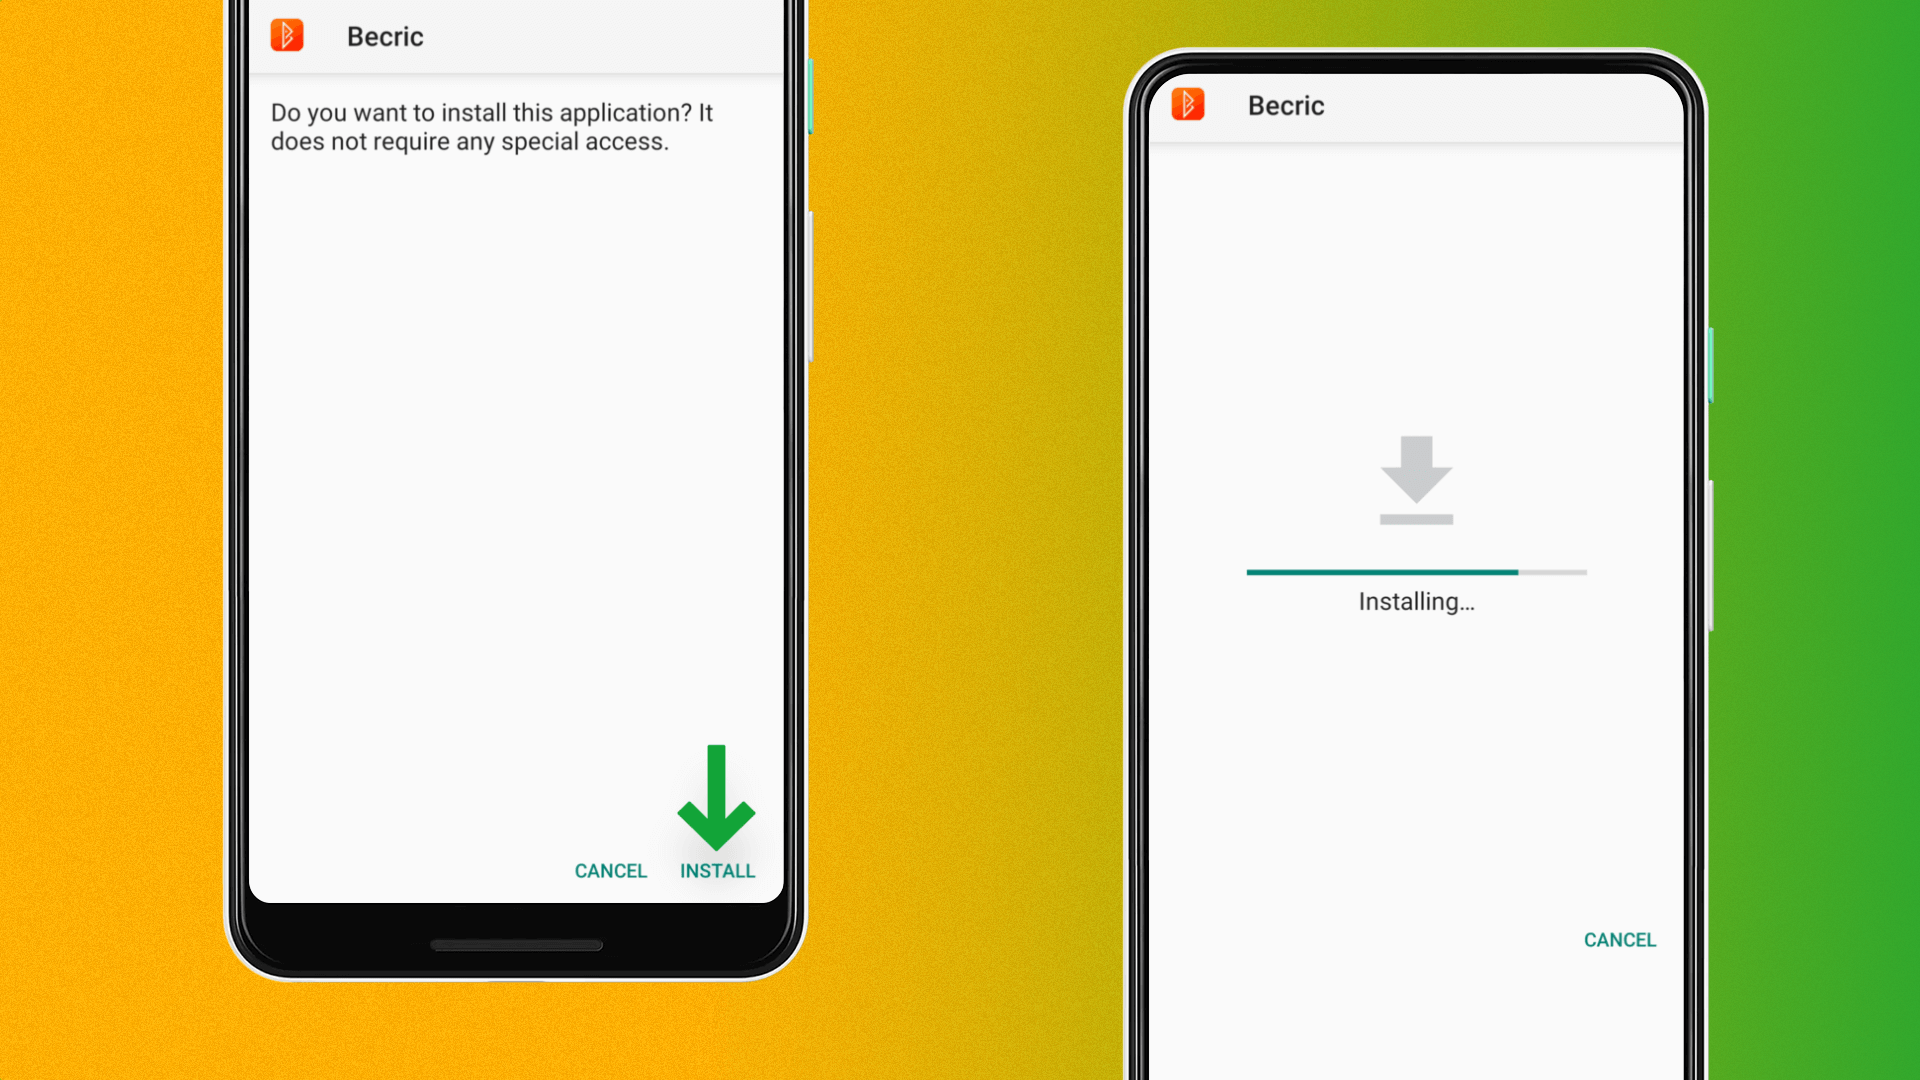 The process of installing the Becric app on Android